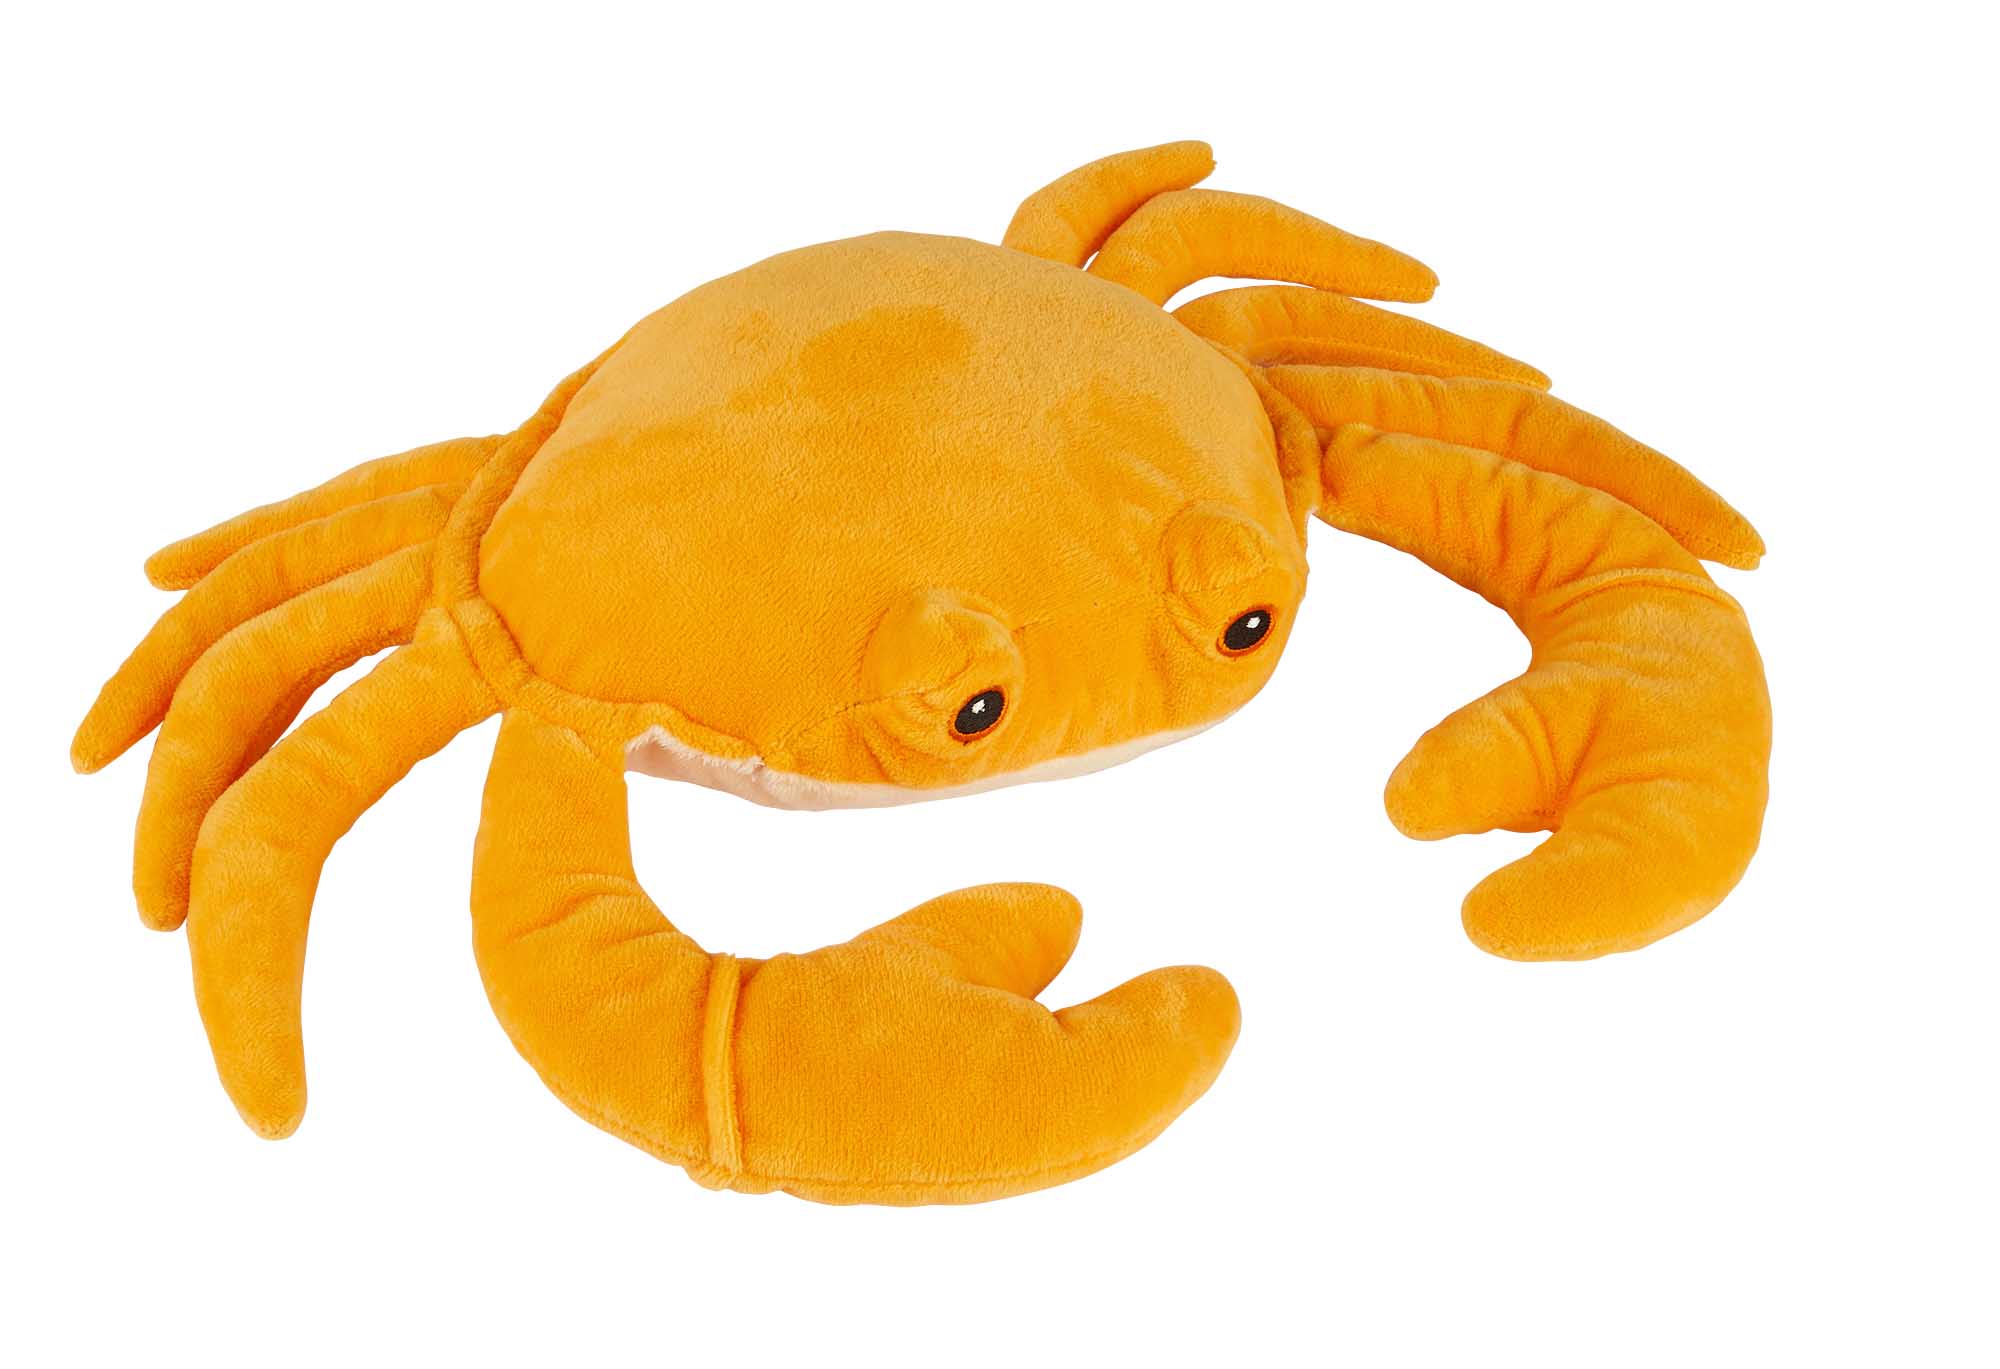 Bespoke Suppliers of Toy Crab for Theme Parks